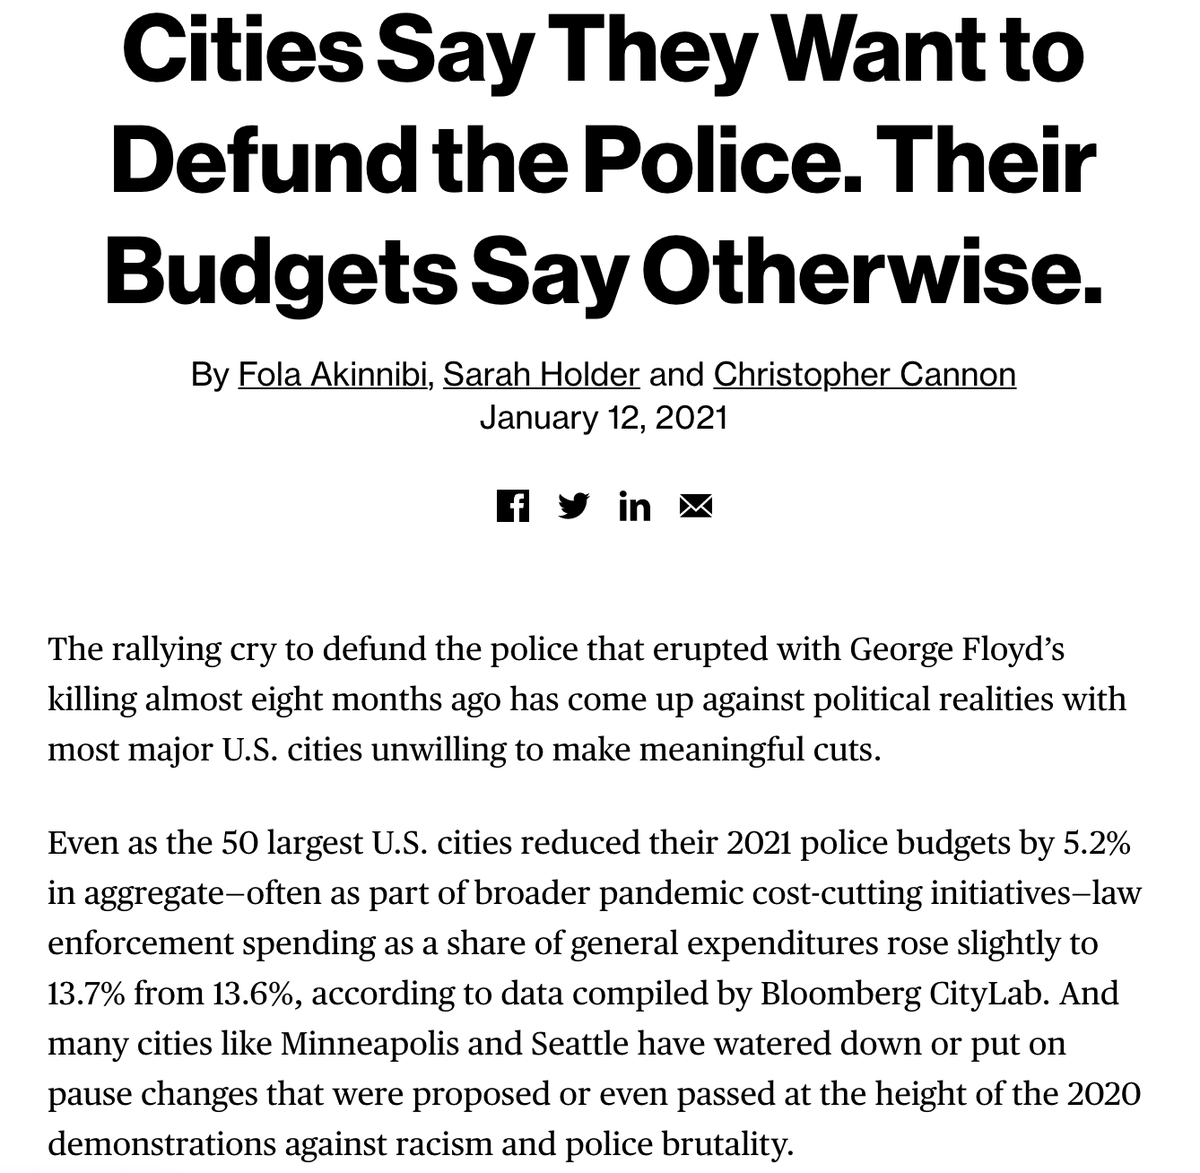 Despite the longest period of sustained protest in our nation's history in 2020:Municipalities throughout the country continue to spend more on policing than educationAnd while some cities have defunded and reallocatedPolice spending actually *increased* in 2021